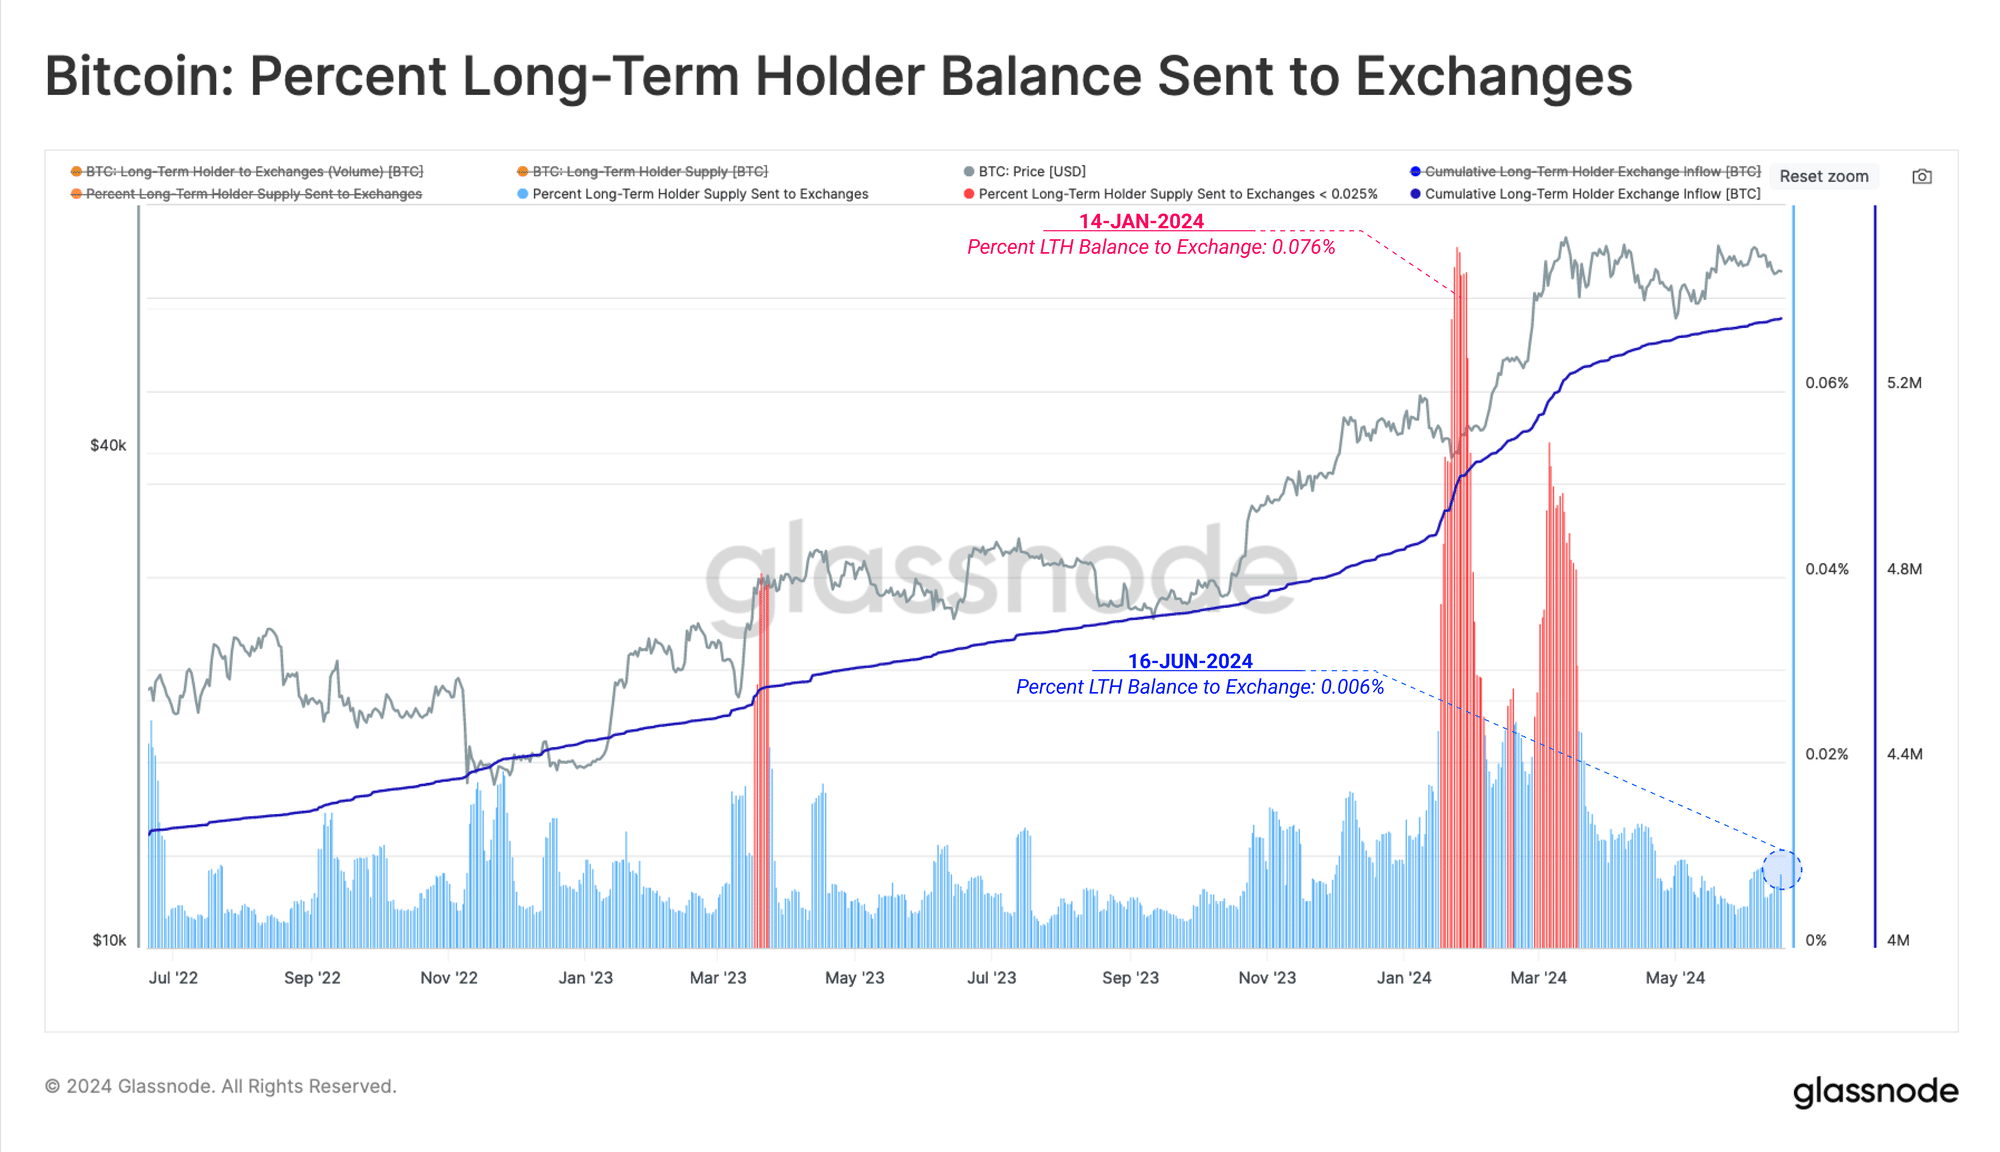 The long-term BTC holder's balance is sent to the exchange platforms